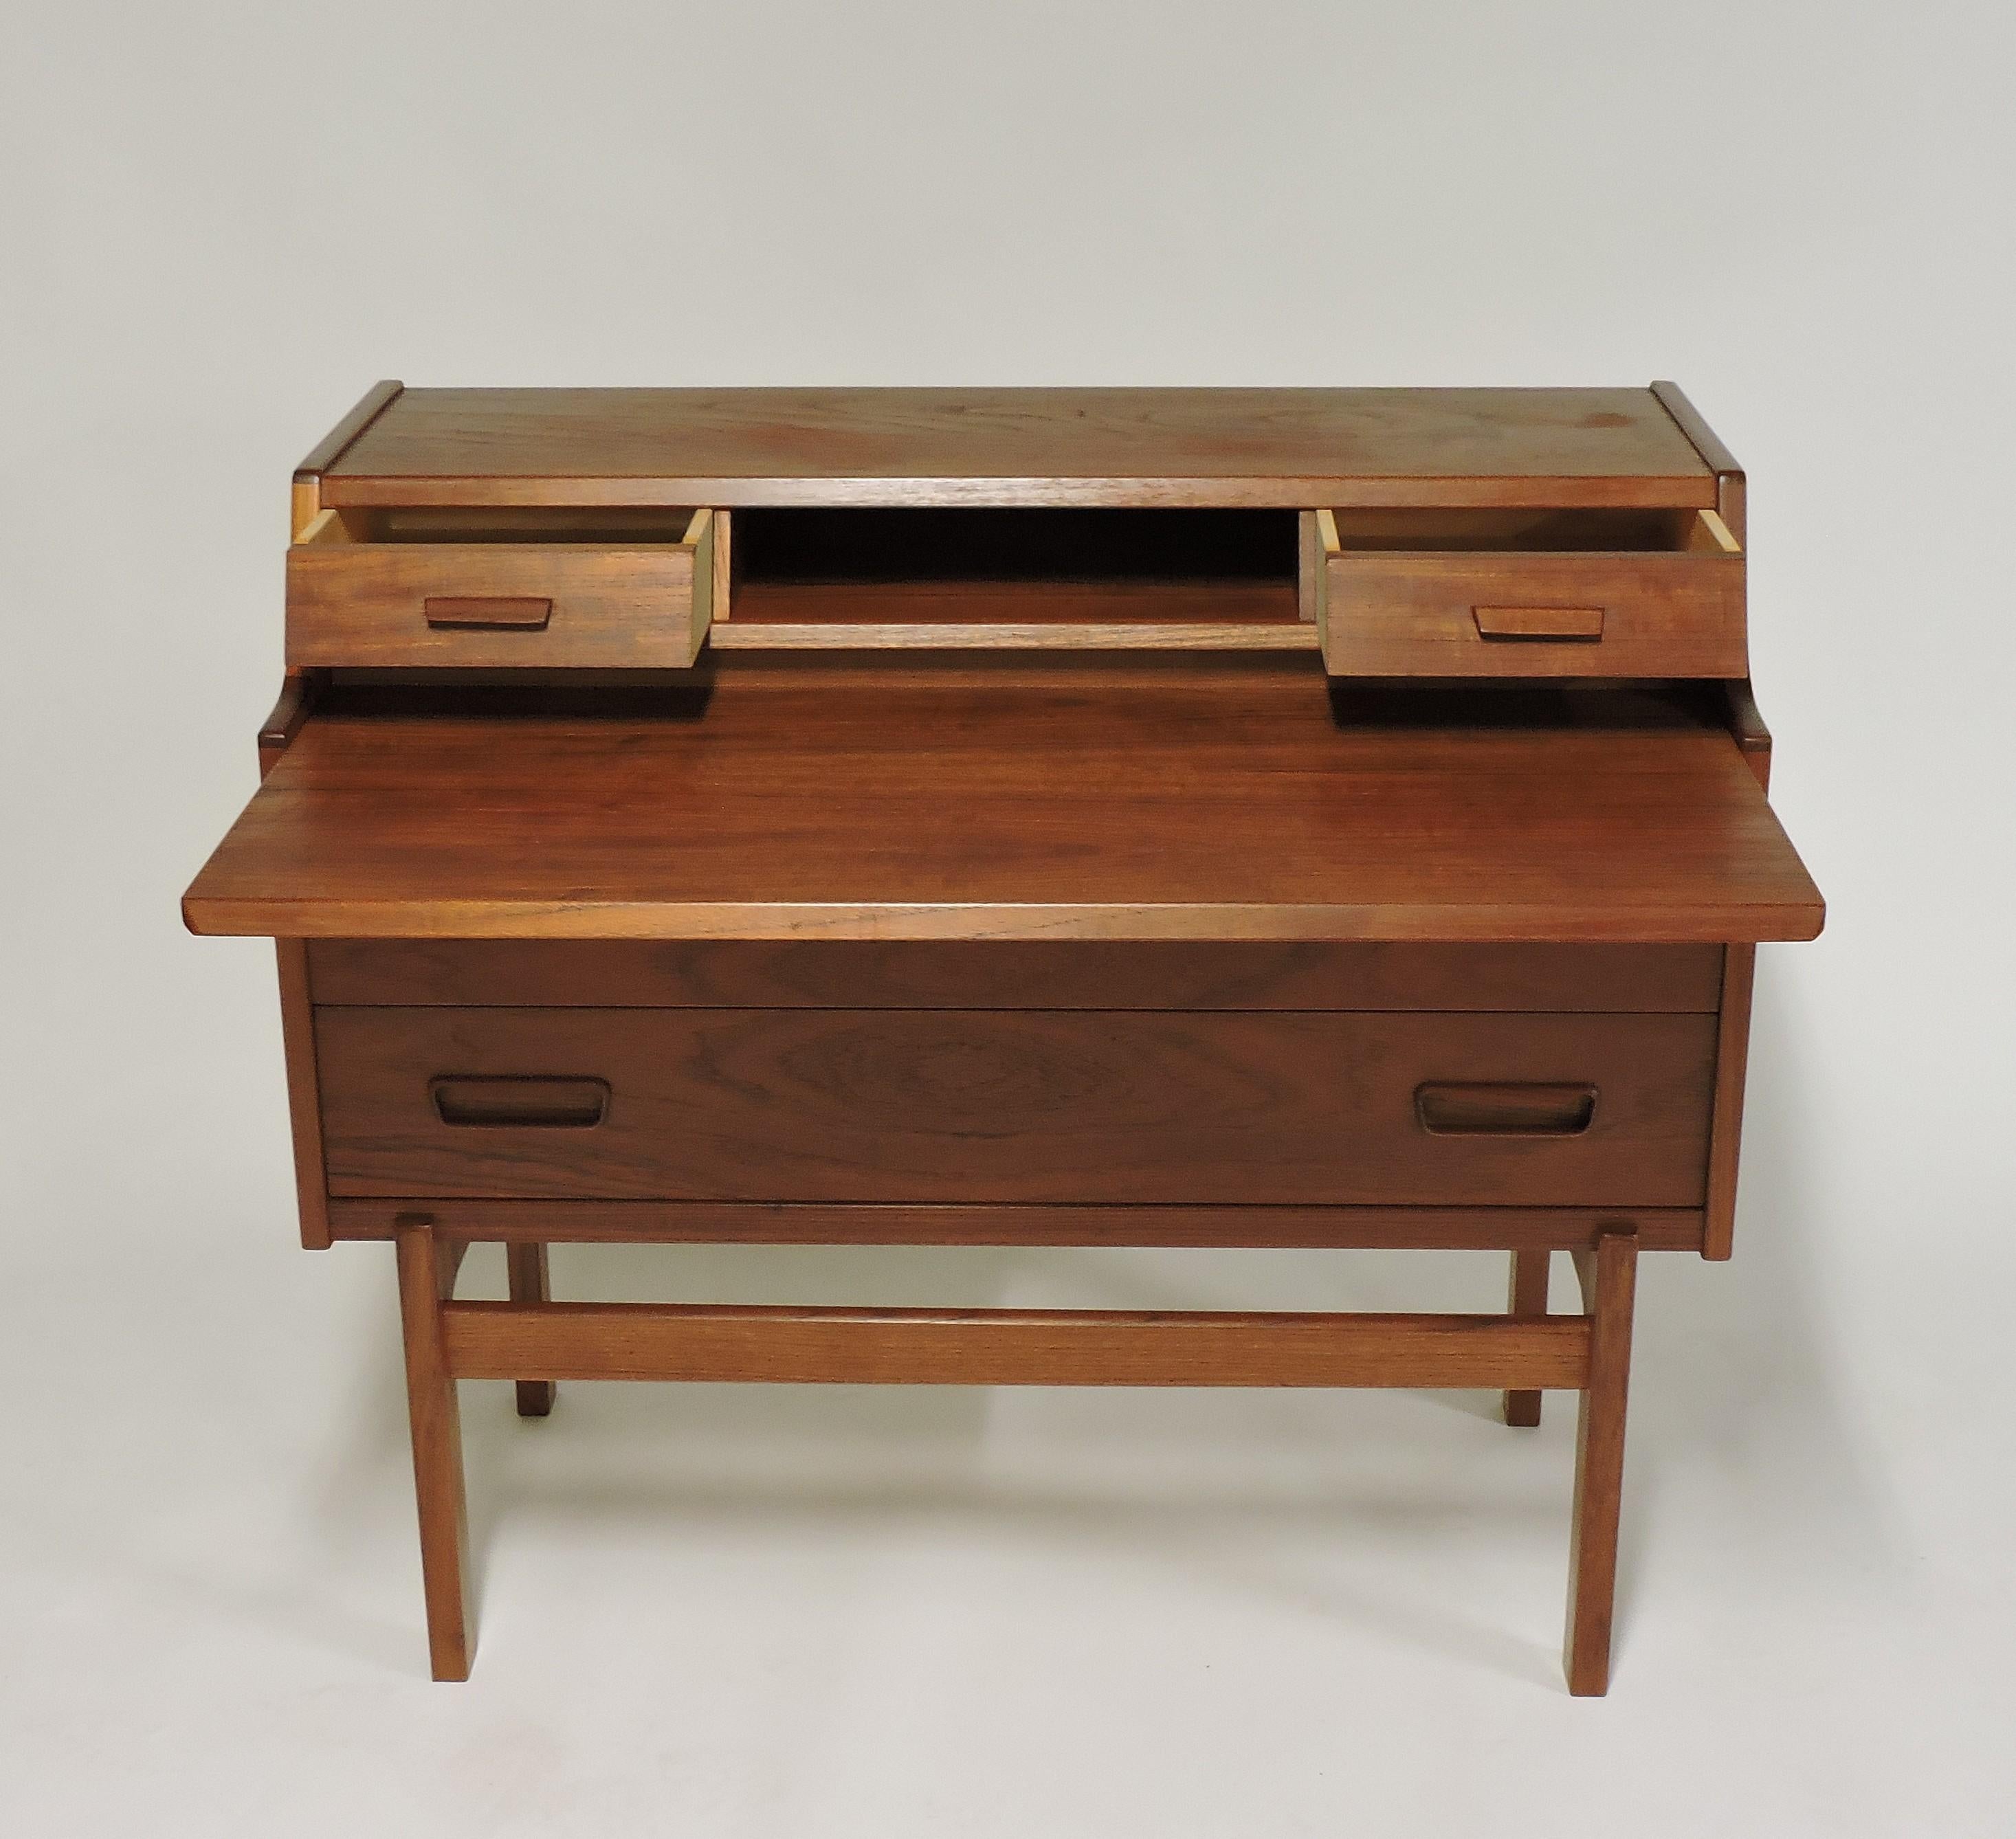 Practical and elegant teak secretary desk designed by Arne Wahl Iversen and made in Denmark by Vinde Mobelfabrik. This desk has wonderful features that include two large drawers - including one that locks - two small drawers, a cubbyhole, and a